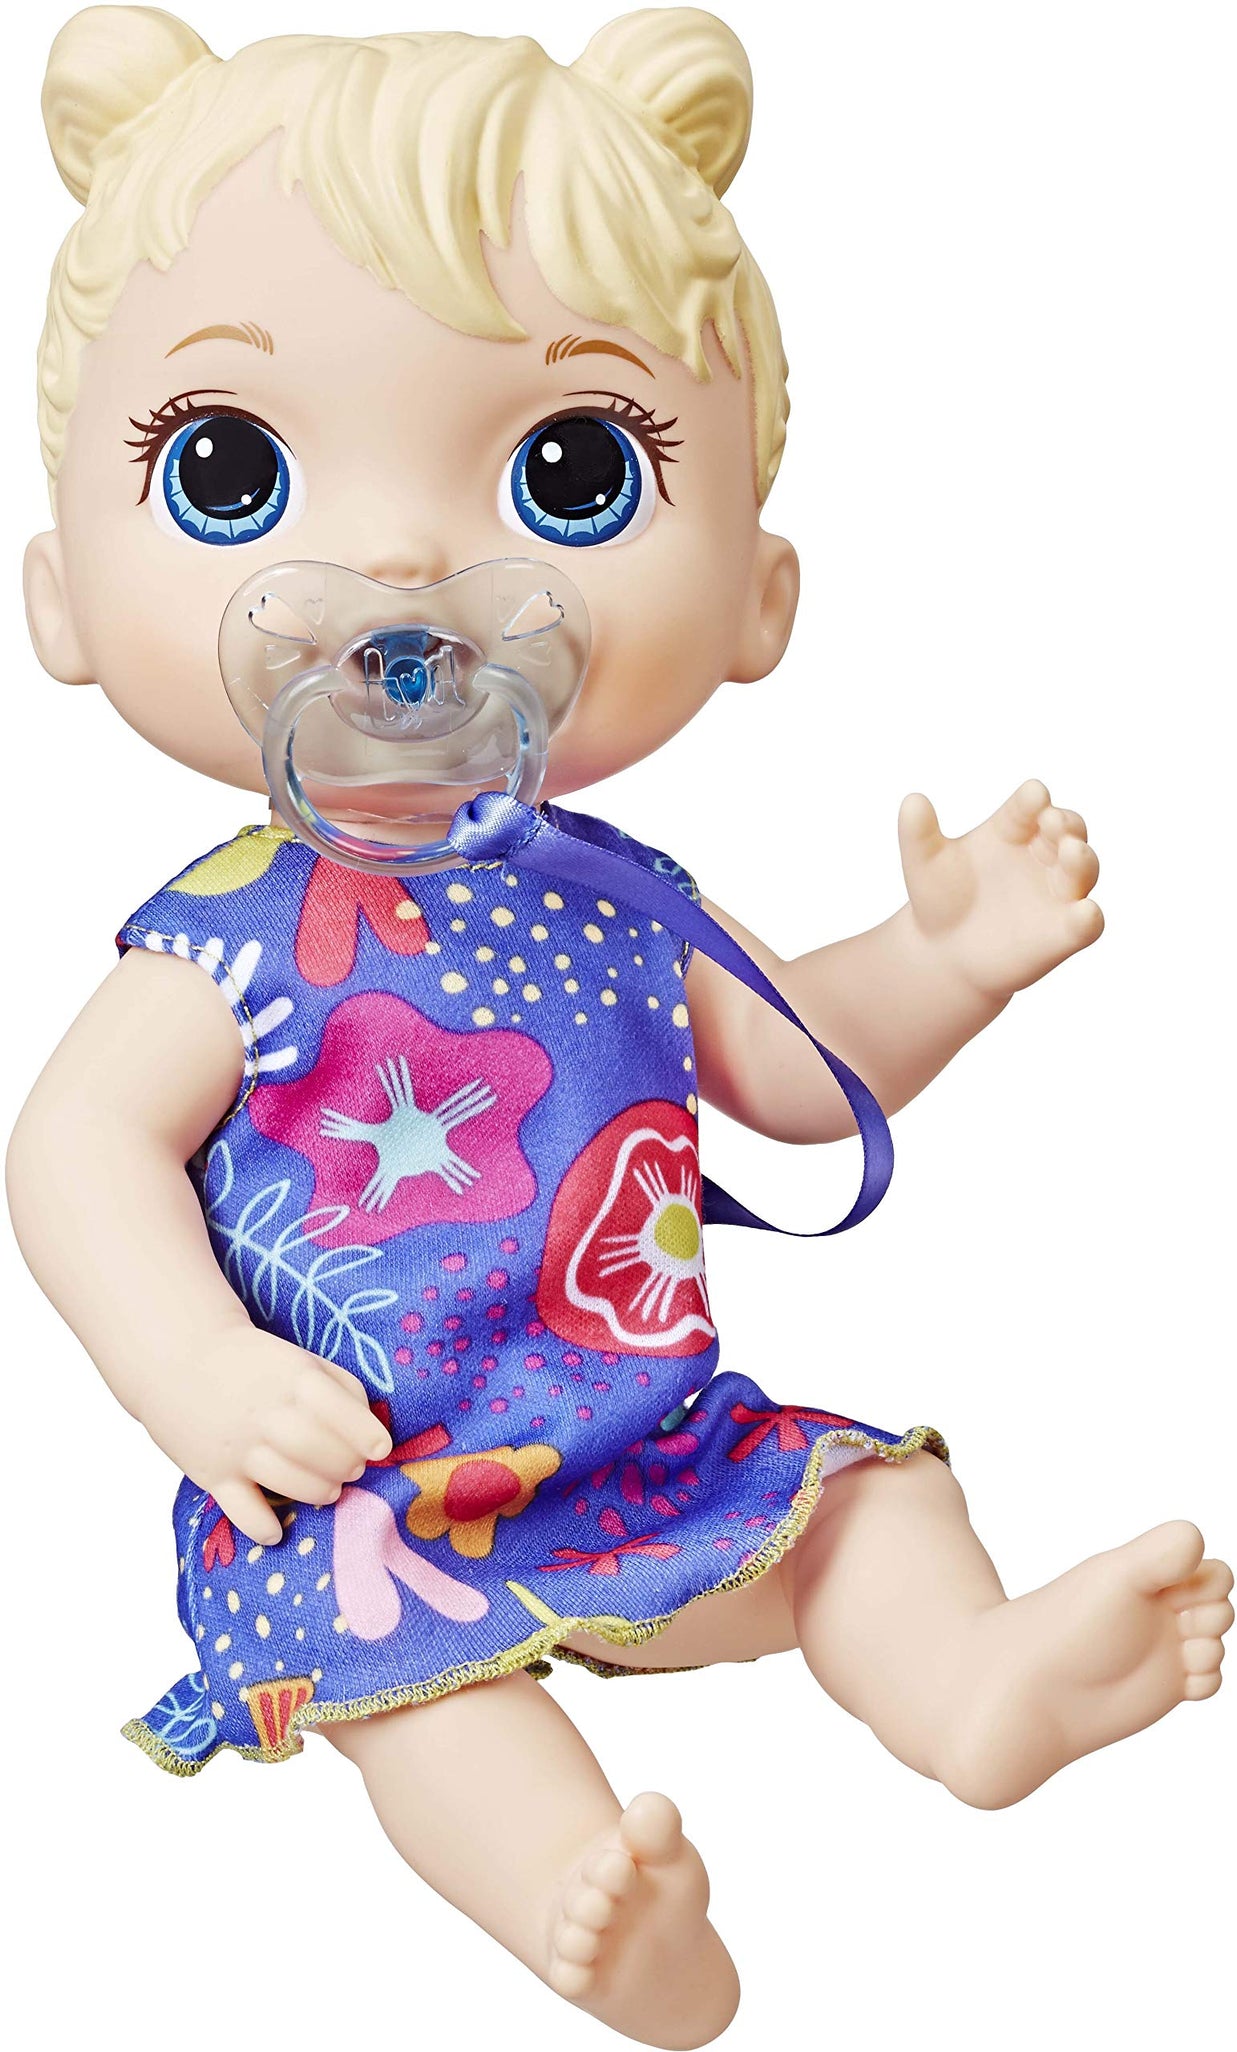 Baby Alive Baby Lil Sounds: Interactive Baby Doll for Girls & Boys Ages 3 & Up, Makes 10 Sound Effects, Including Giggles, Cries, Baby Doll with Pacifier